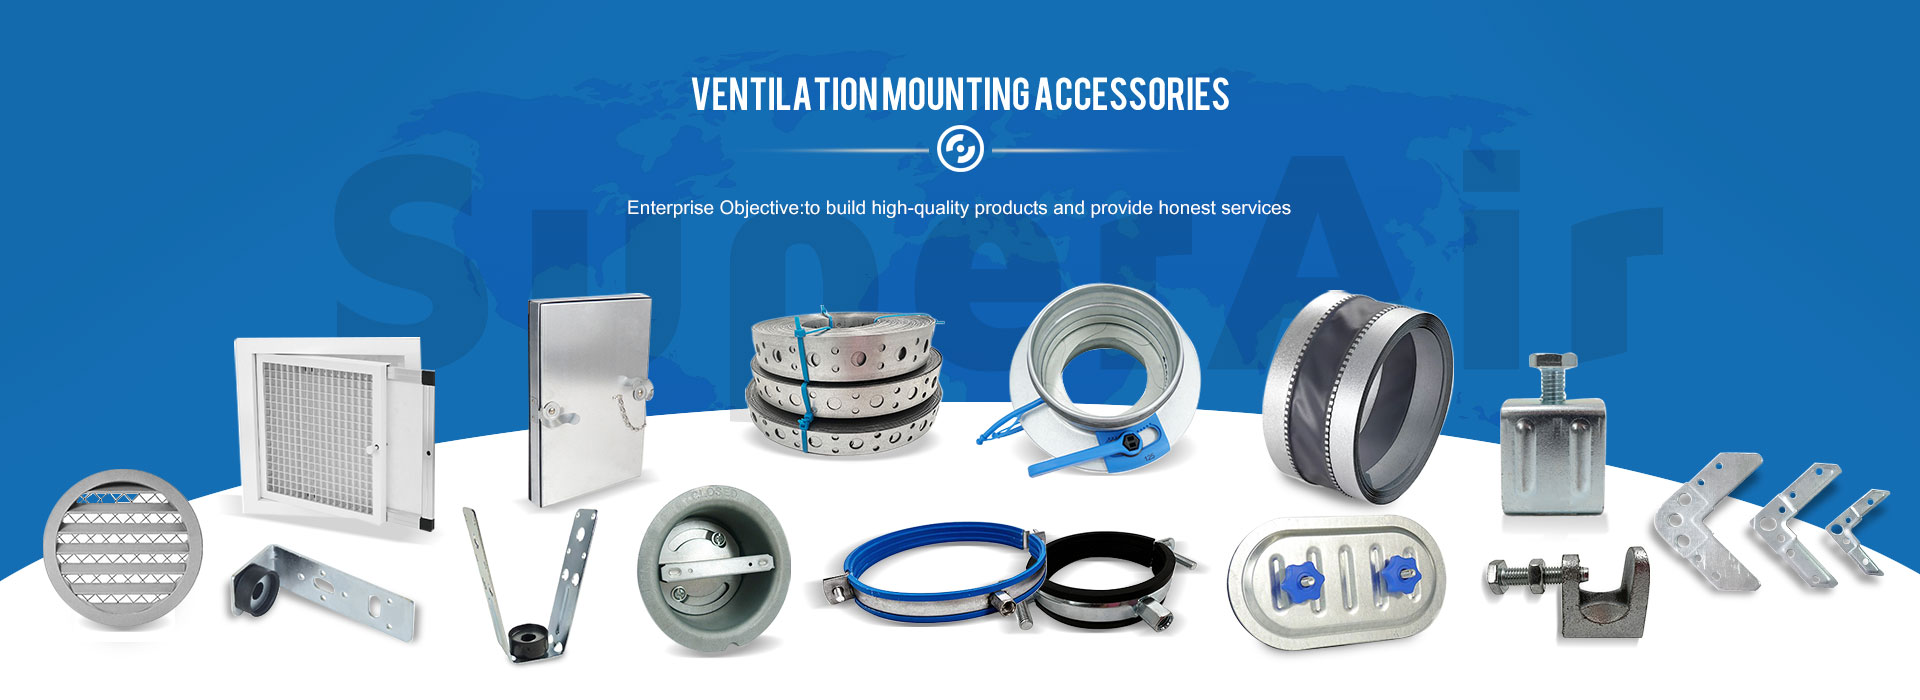 Ventilation Mounting Accessories Suppliers